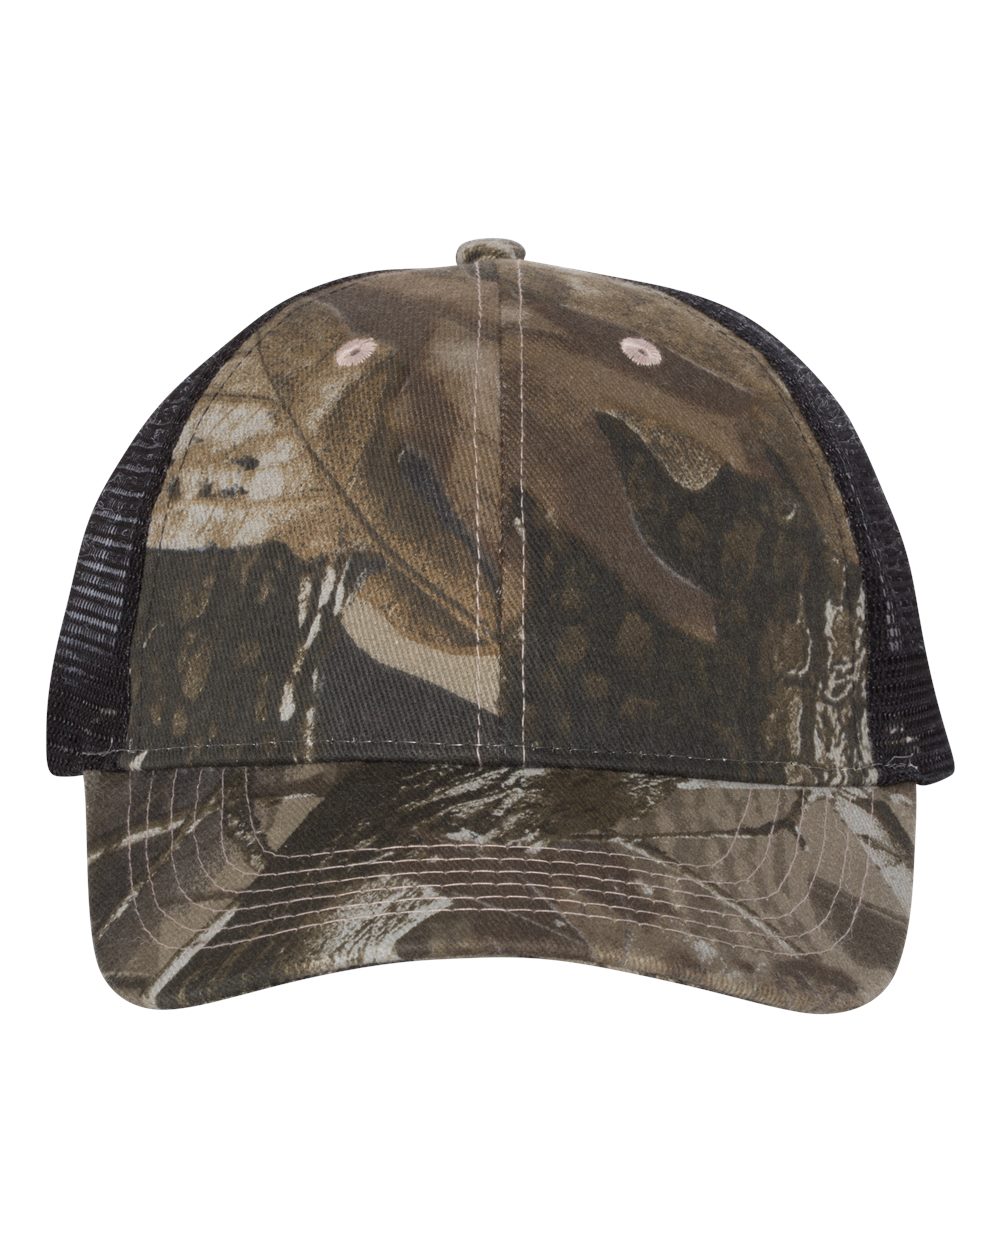 click to view Realtree Hardwoods/ Black